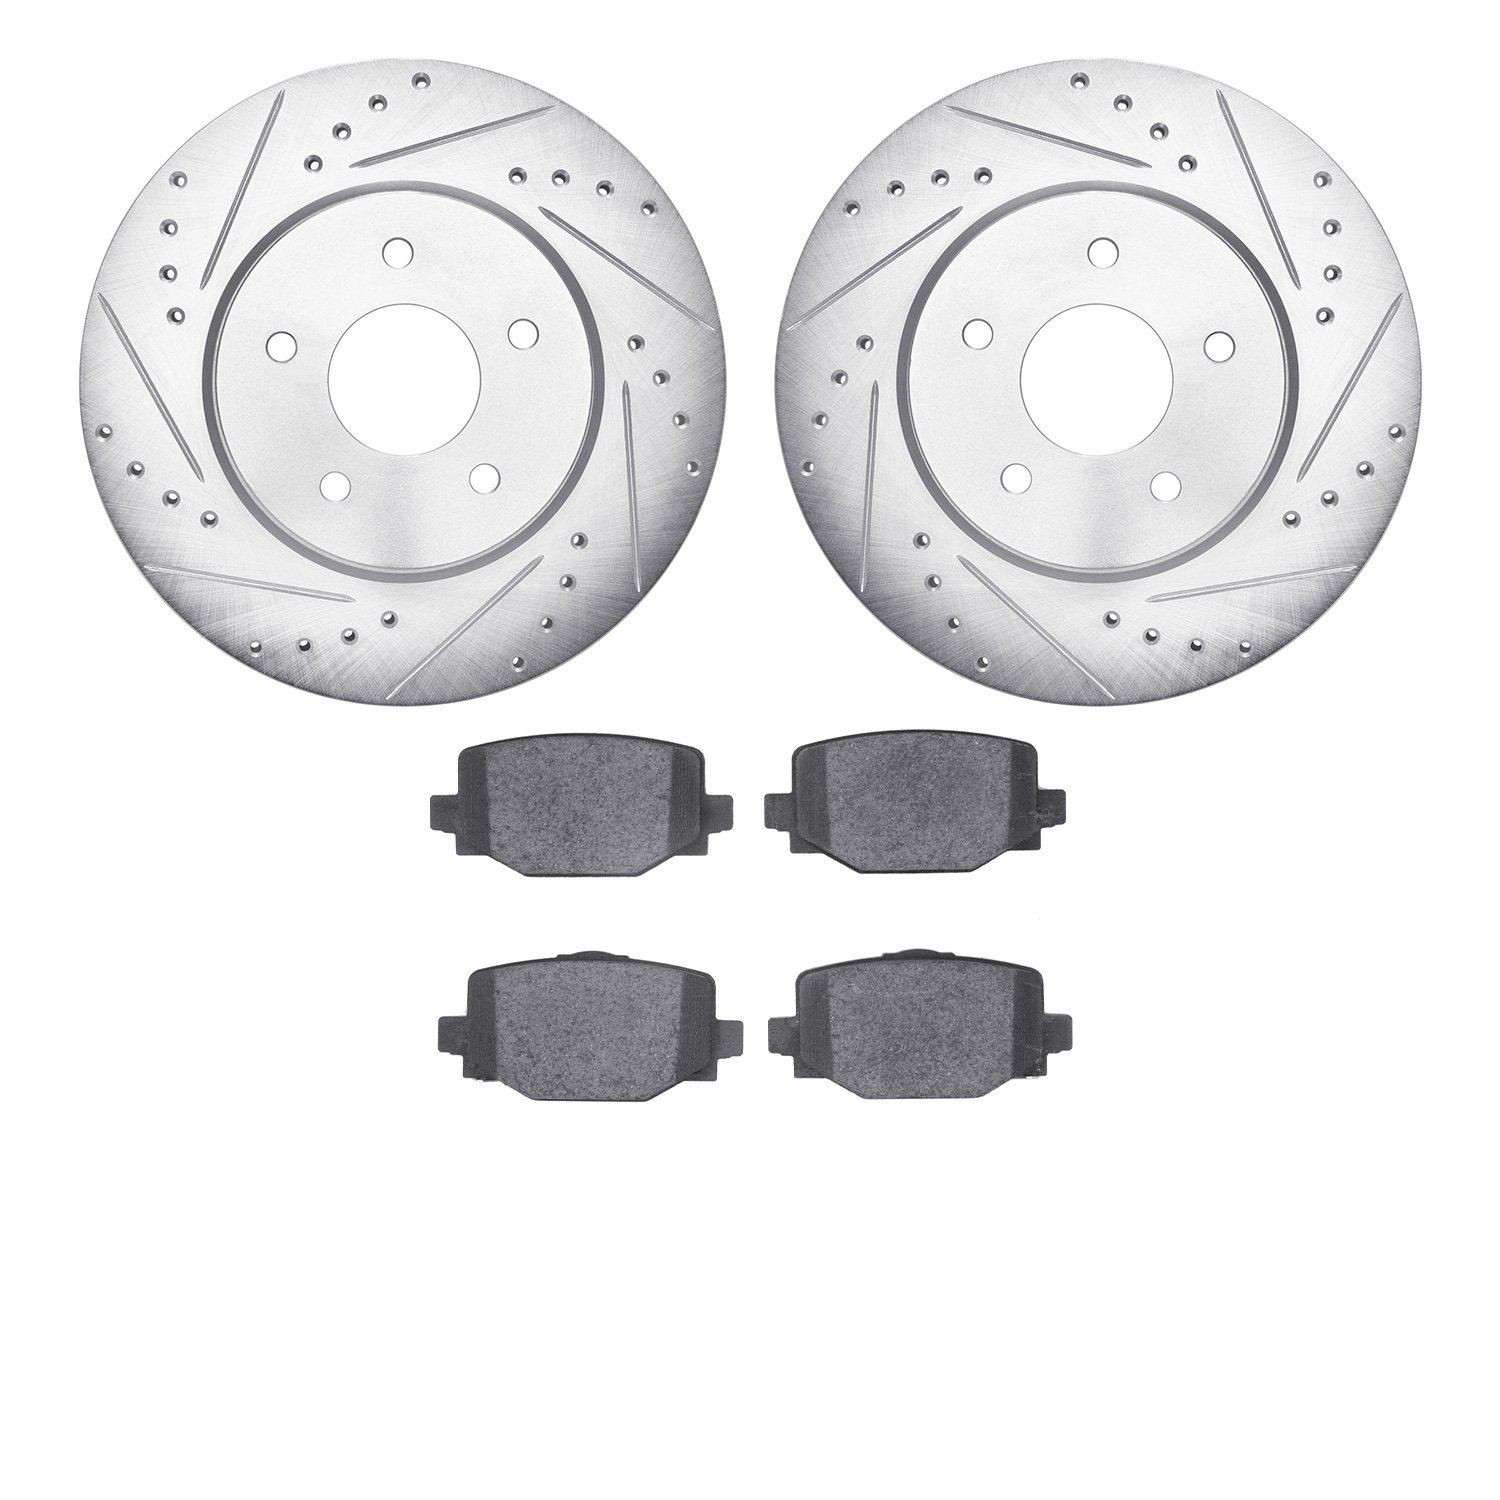 7502-68021 Drilled/Slotted Brake Rotors w/5000 Advanced Brake Pads Kit [Silver], Fits Select Infiniti/Nissan, Position: Rear